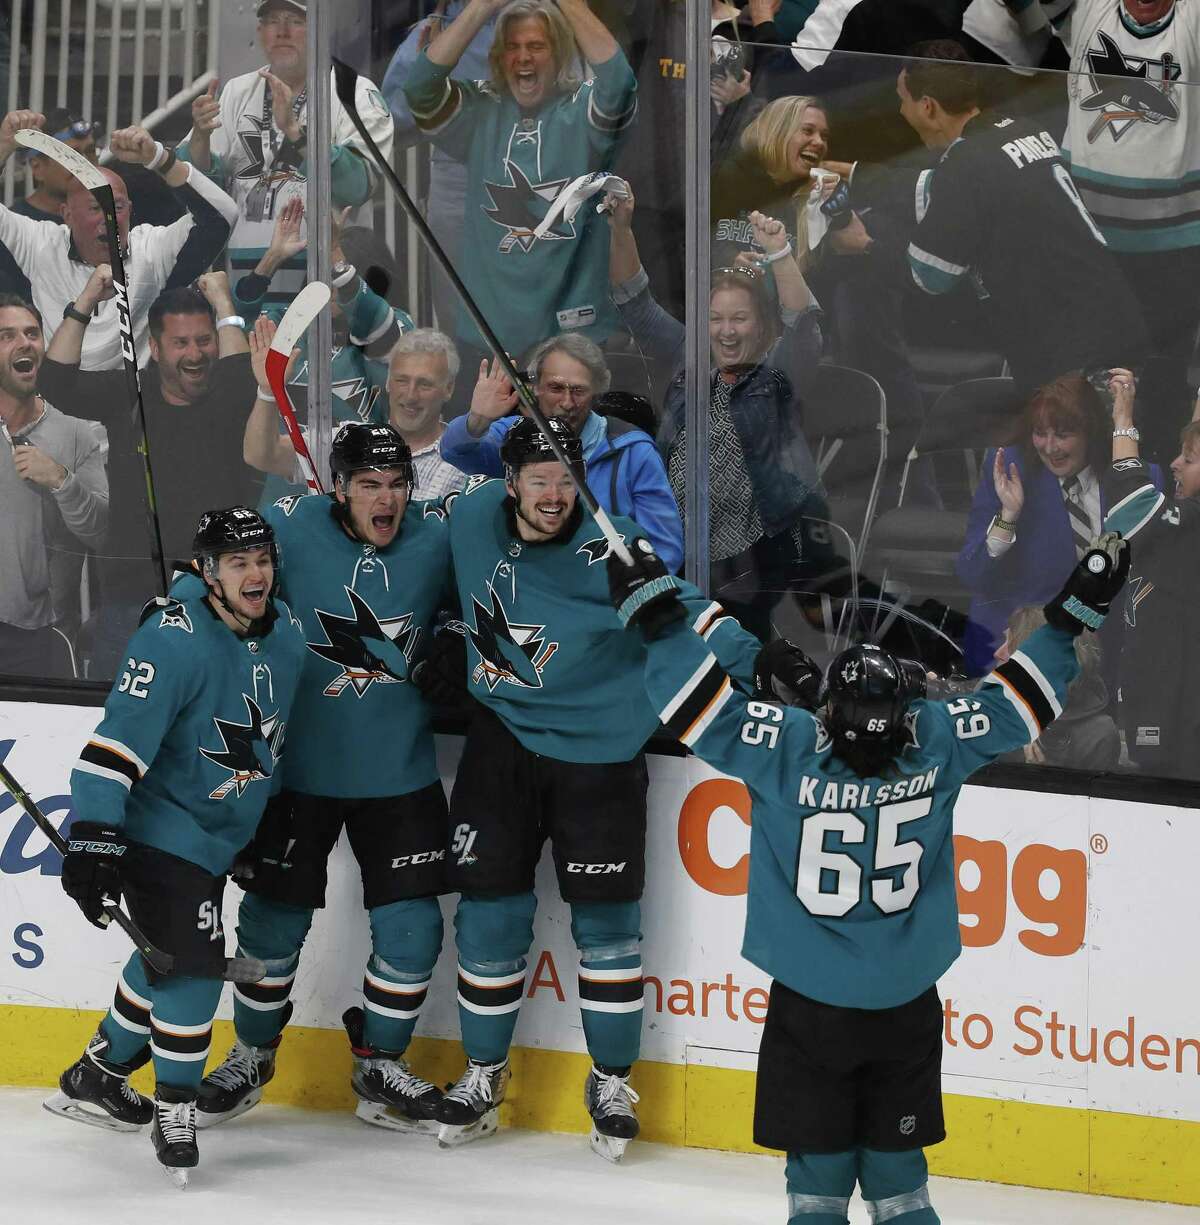 San Jose Sharks' Kevin Labanc (62) celebrates with, San Jose Sharks' Timo Meier (28), San Jose Sharks' Tomas Hertl (48), San Jose Sharks' Erik Karlsson (65) after scoring against the Vegas Golden Knights during the third period of Game 7 of an NHL hockey first-round playoff series Tuesday, April 23, 2019, in San Jose, Calif.